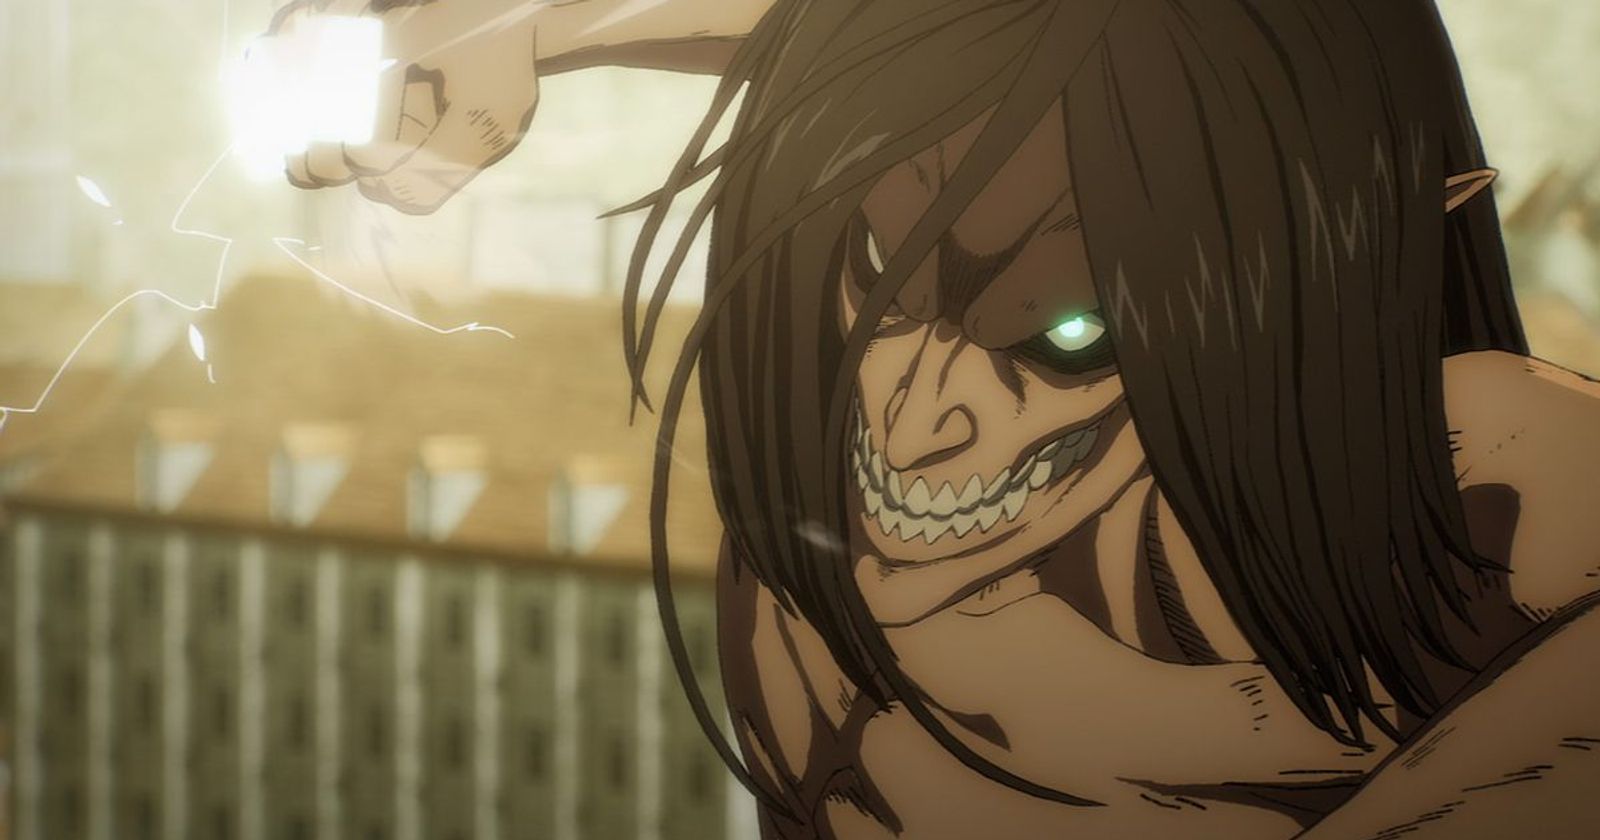 Attack on Titan Final Season Part 3 rumored to have multiple cours